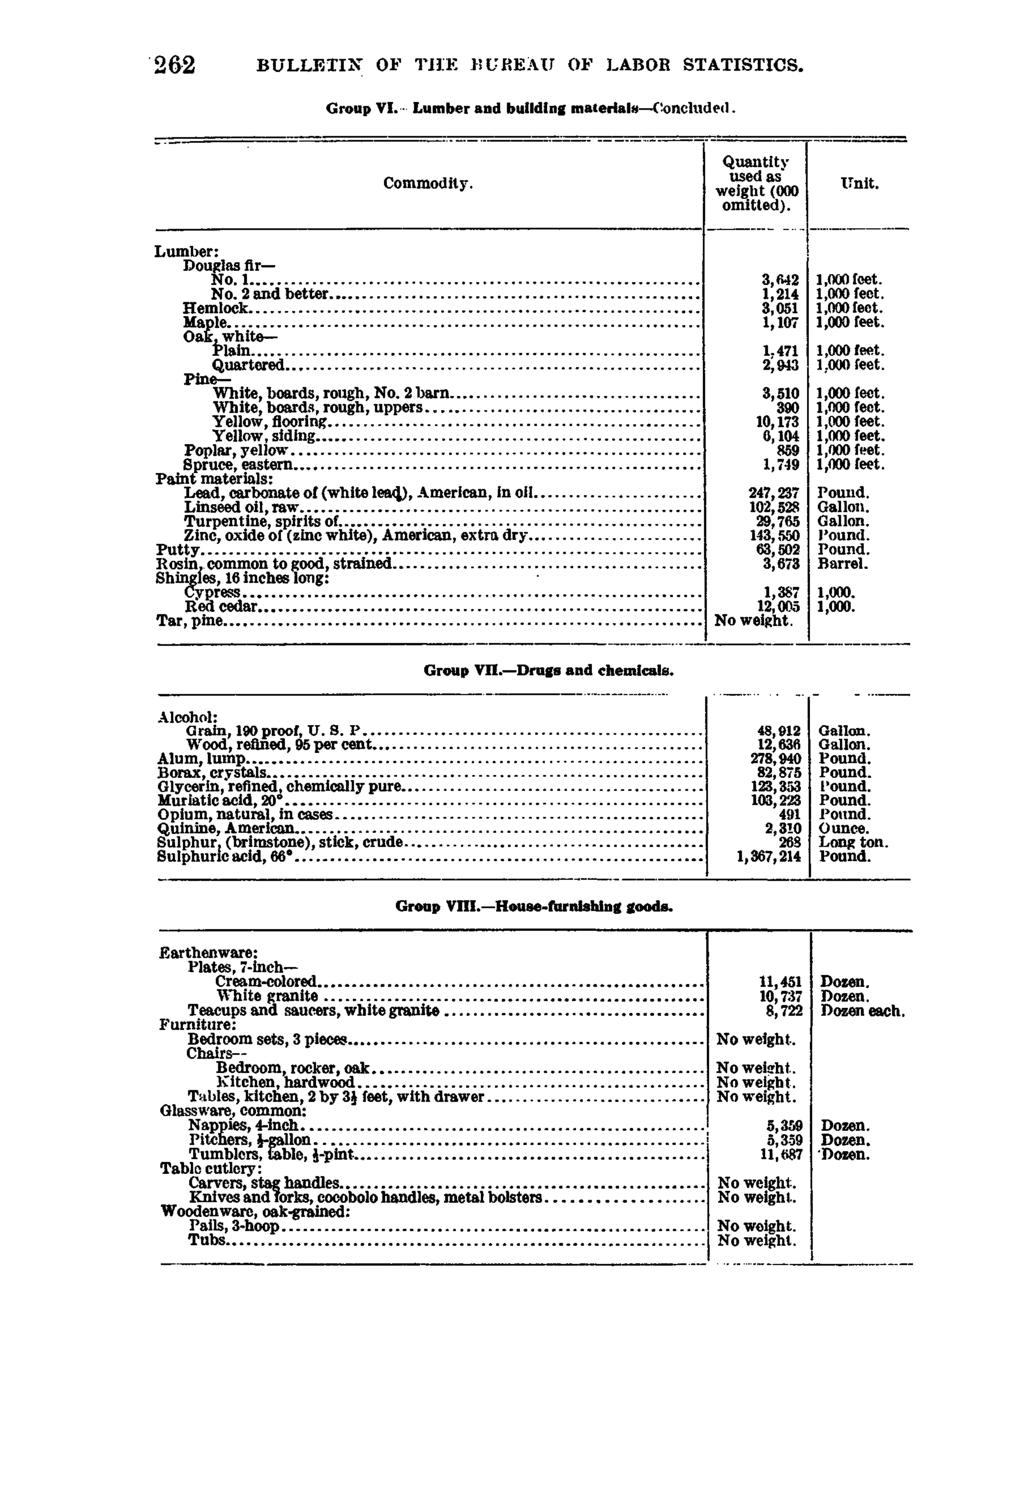 262 BULLETIN OF THE BUREAU OF LABOR STATISTICS. Group VI.- Lumber and building materials Concluded. Commodity. Quantity used as' weight (000 omitted). Unit. Lumber: Douglas fir No. 1... No. 2 and better.